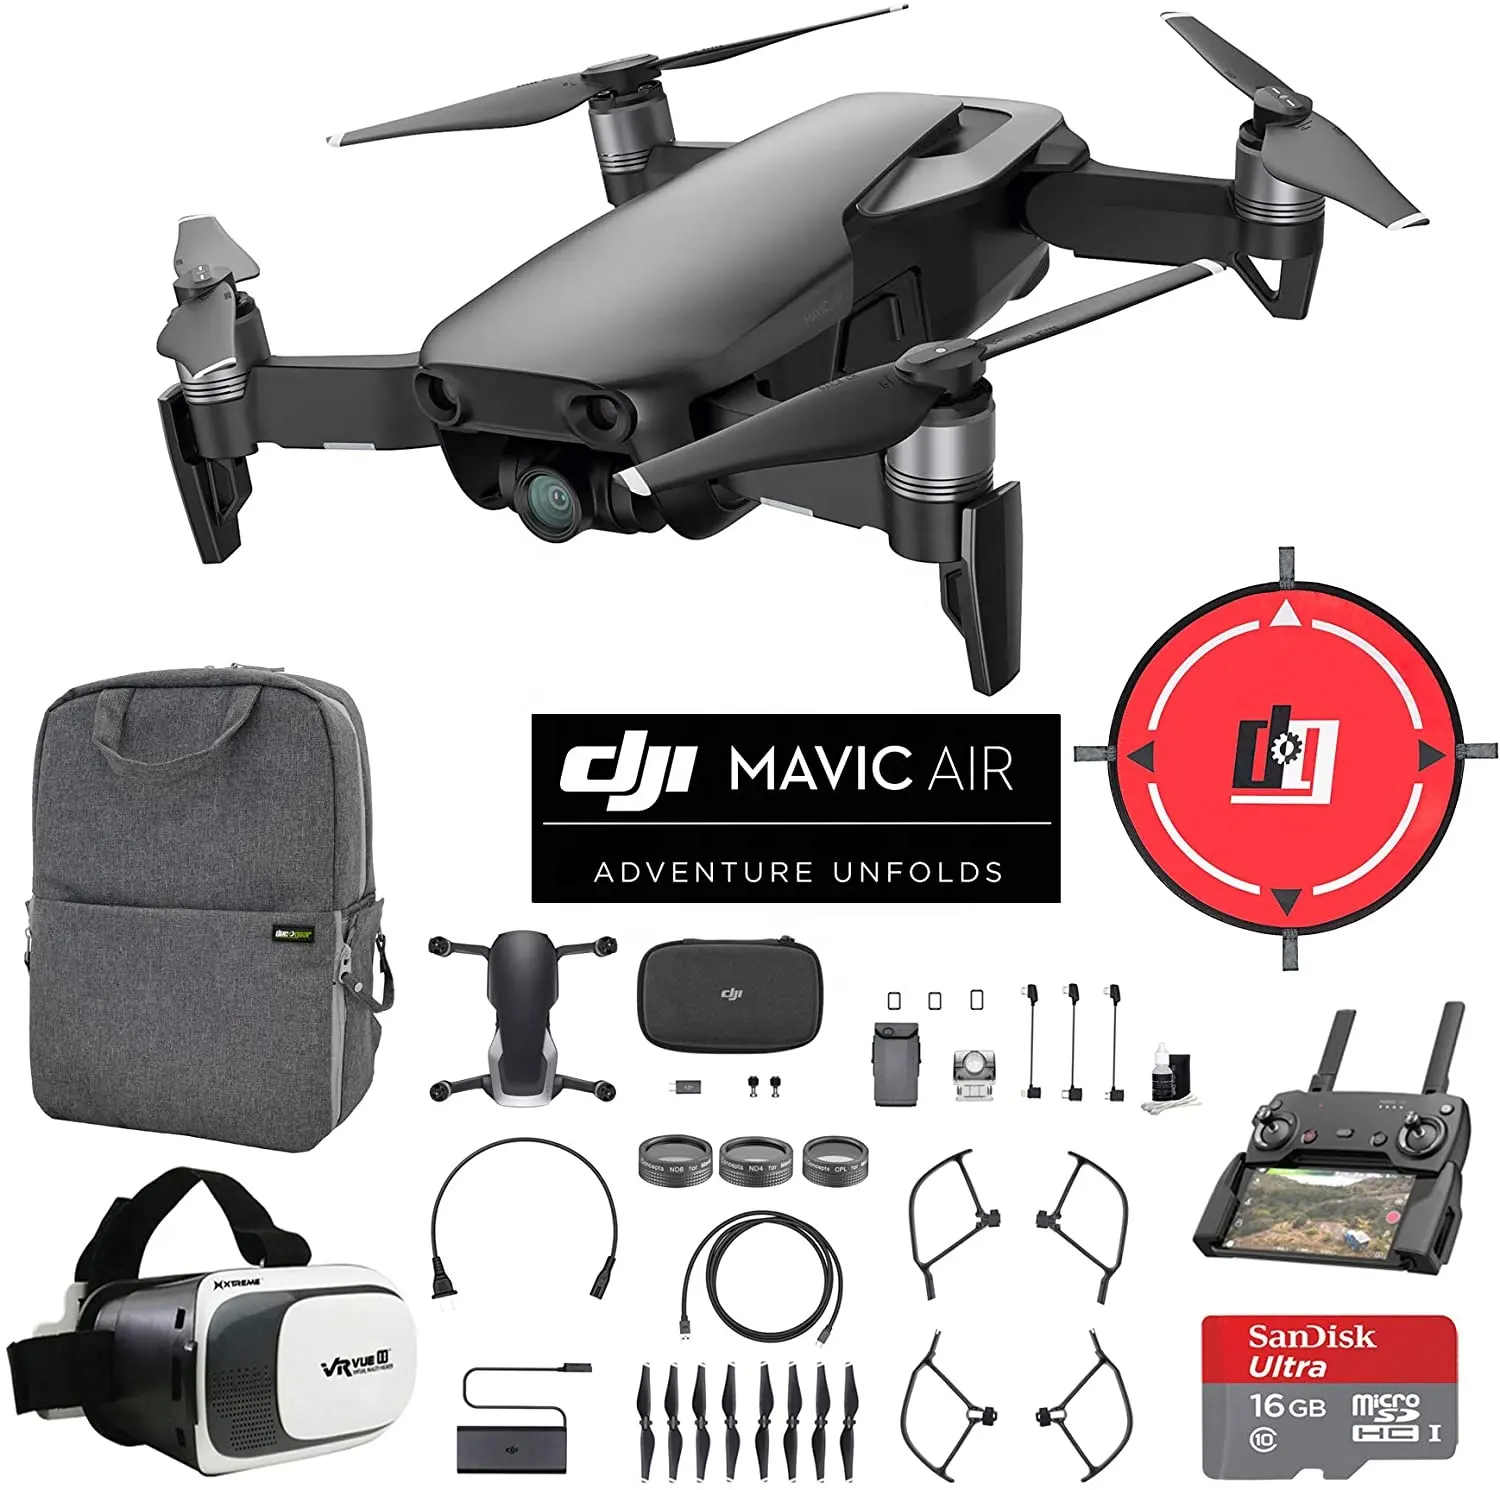 Brand New Sealed for DJI Mavic Air Quadcopter Drone - Onyx Black Fly More Combo with CoPilot Bundle